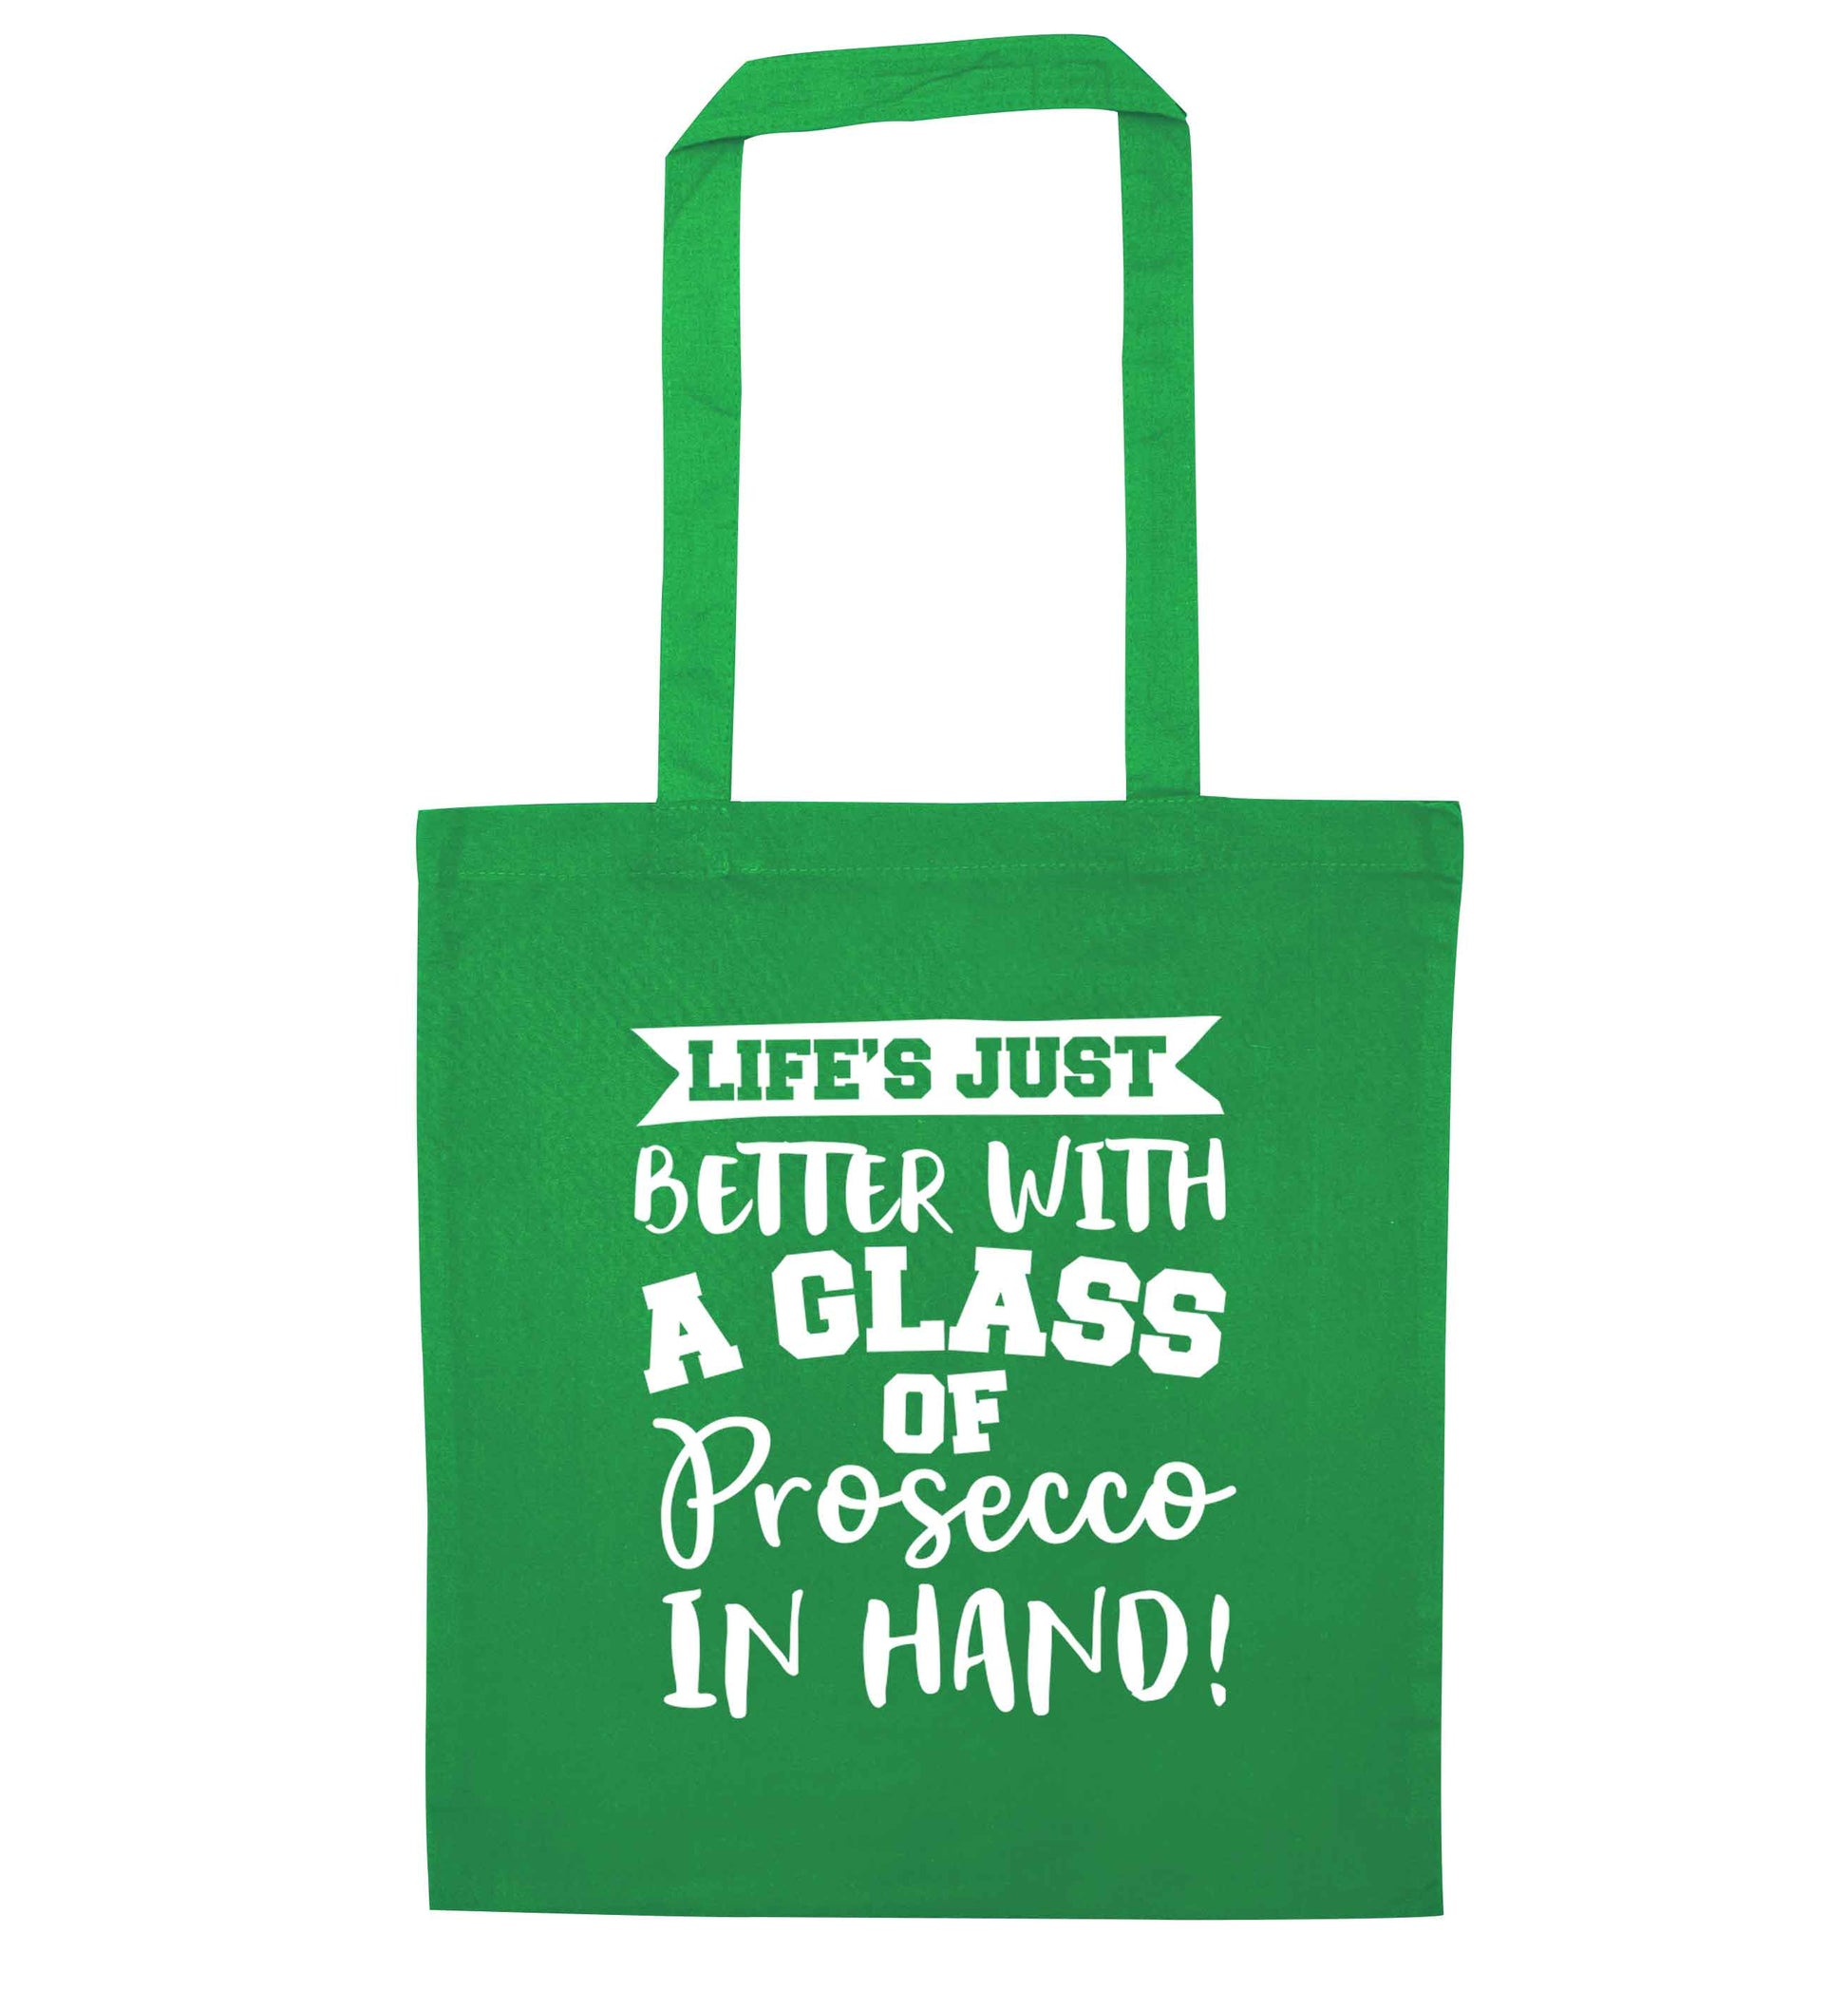 Life's just better with a glass of prosecco in hand green tote bag